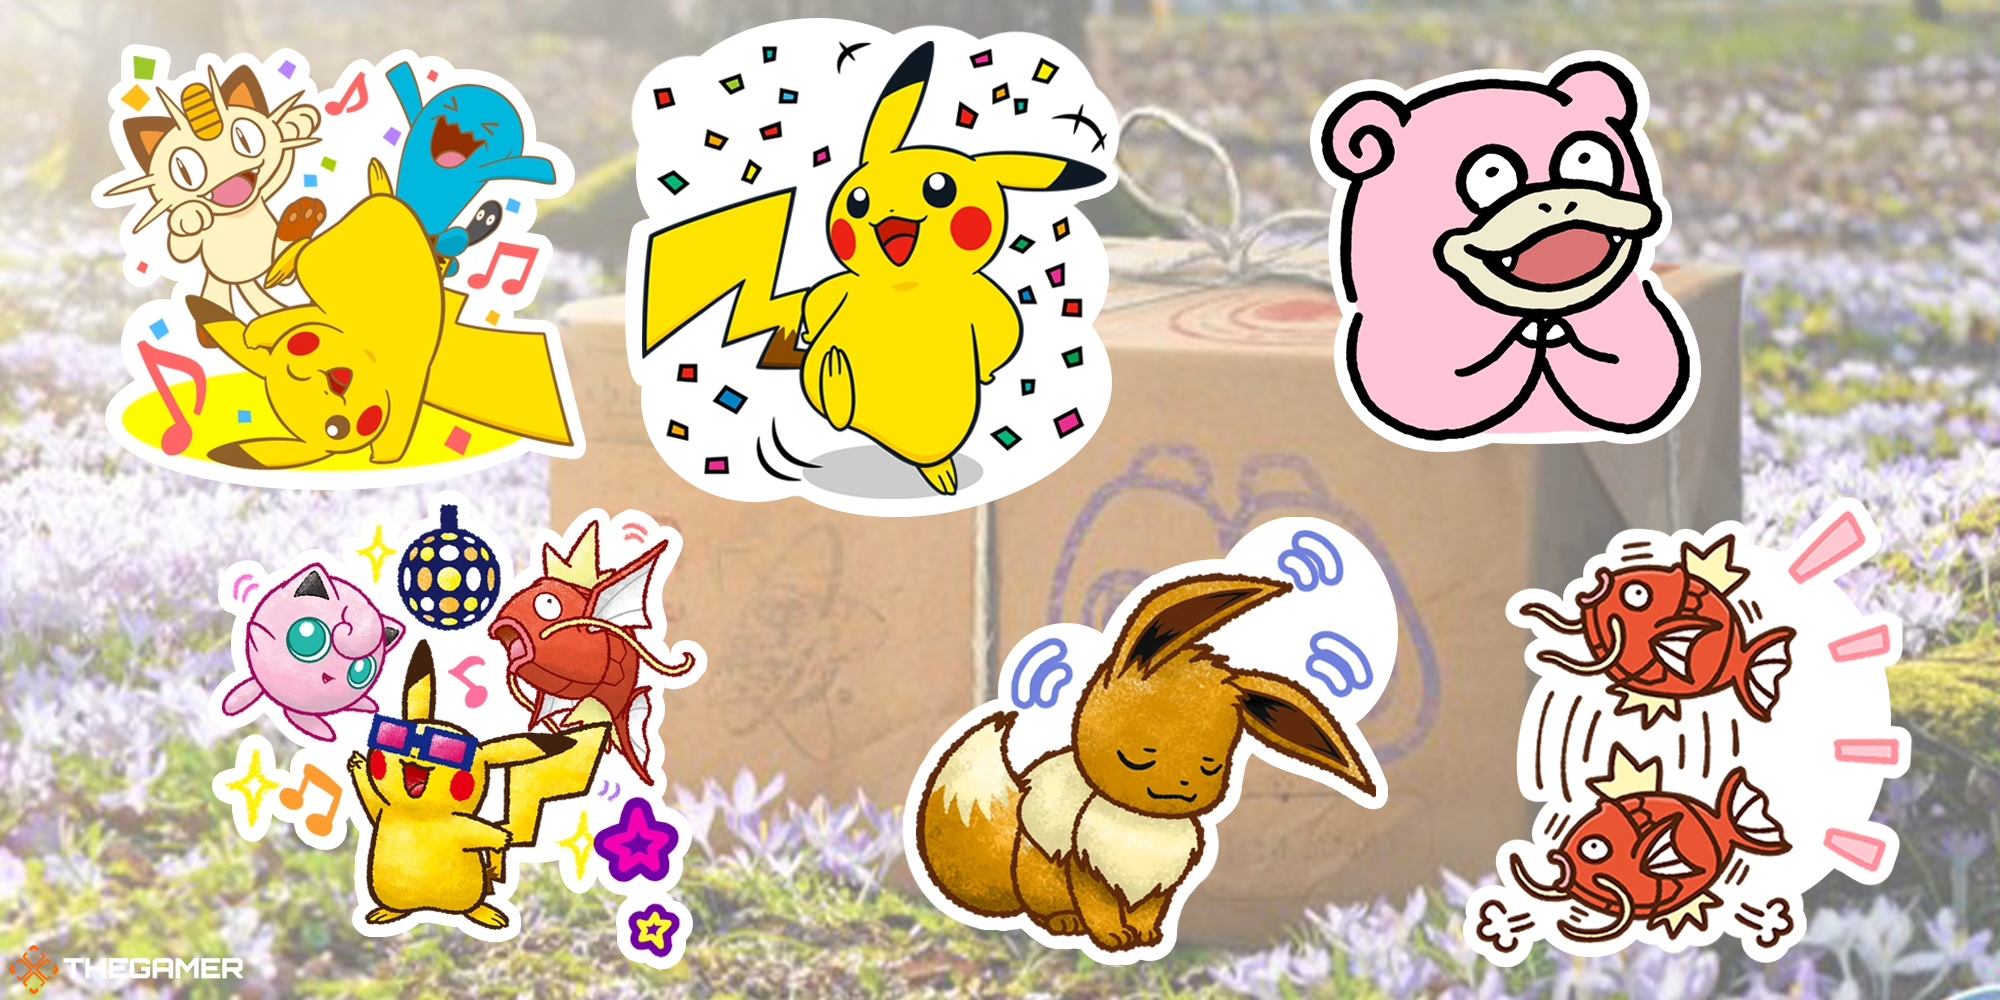 Pokemon Go: Every Sticker Design And How To Get It